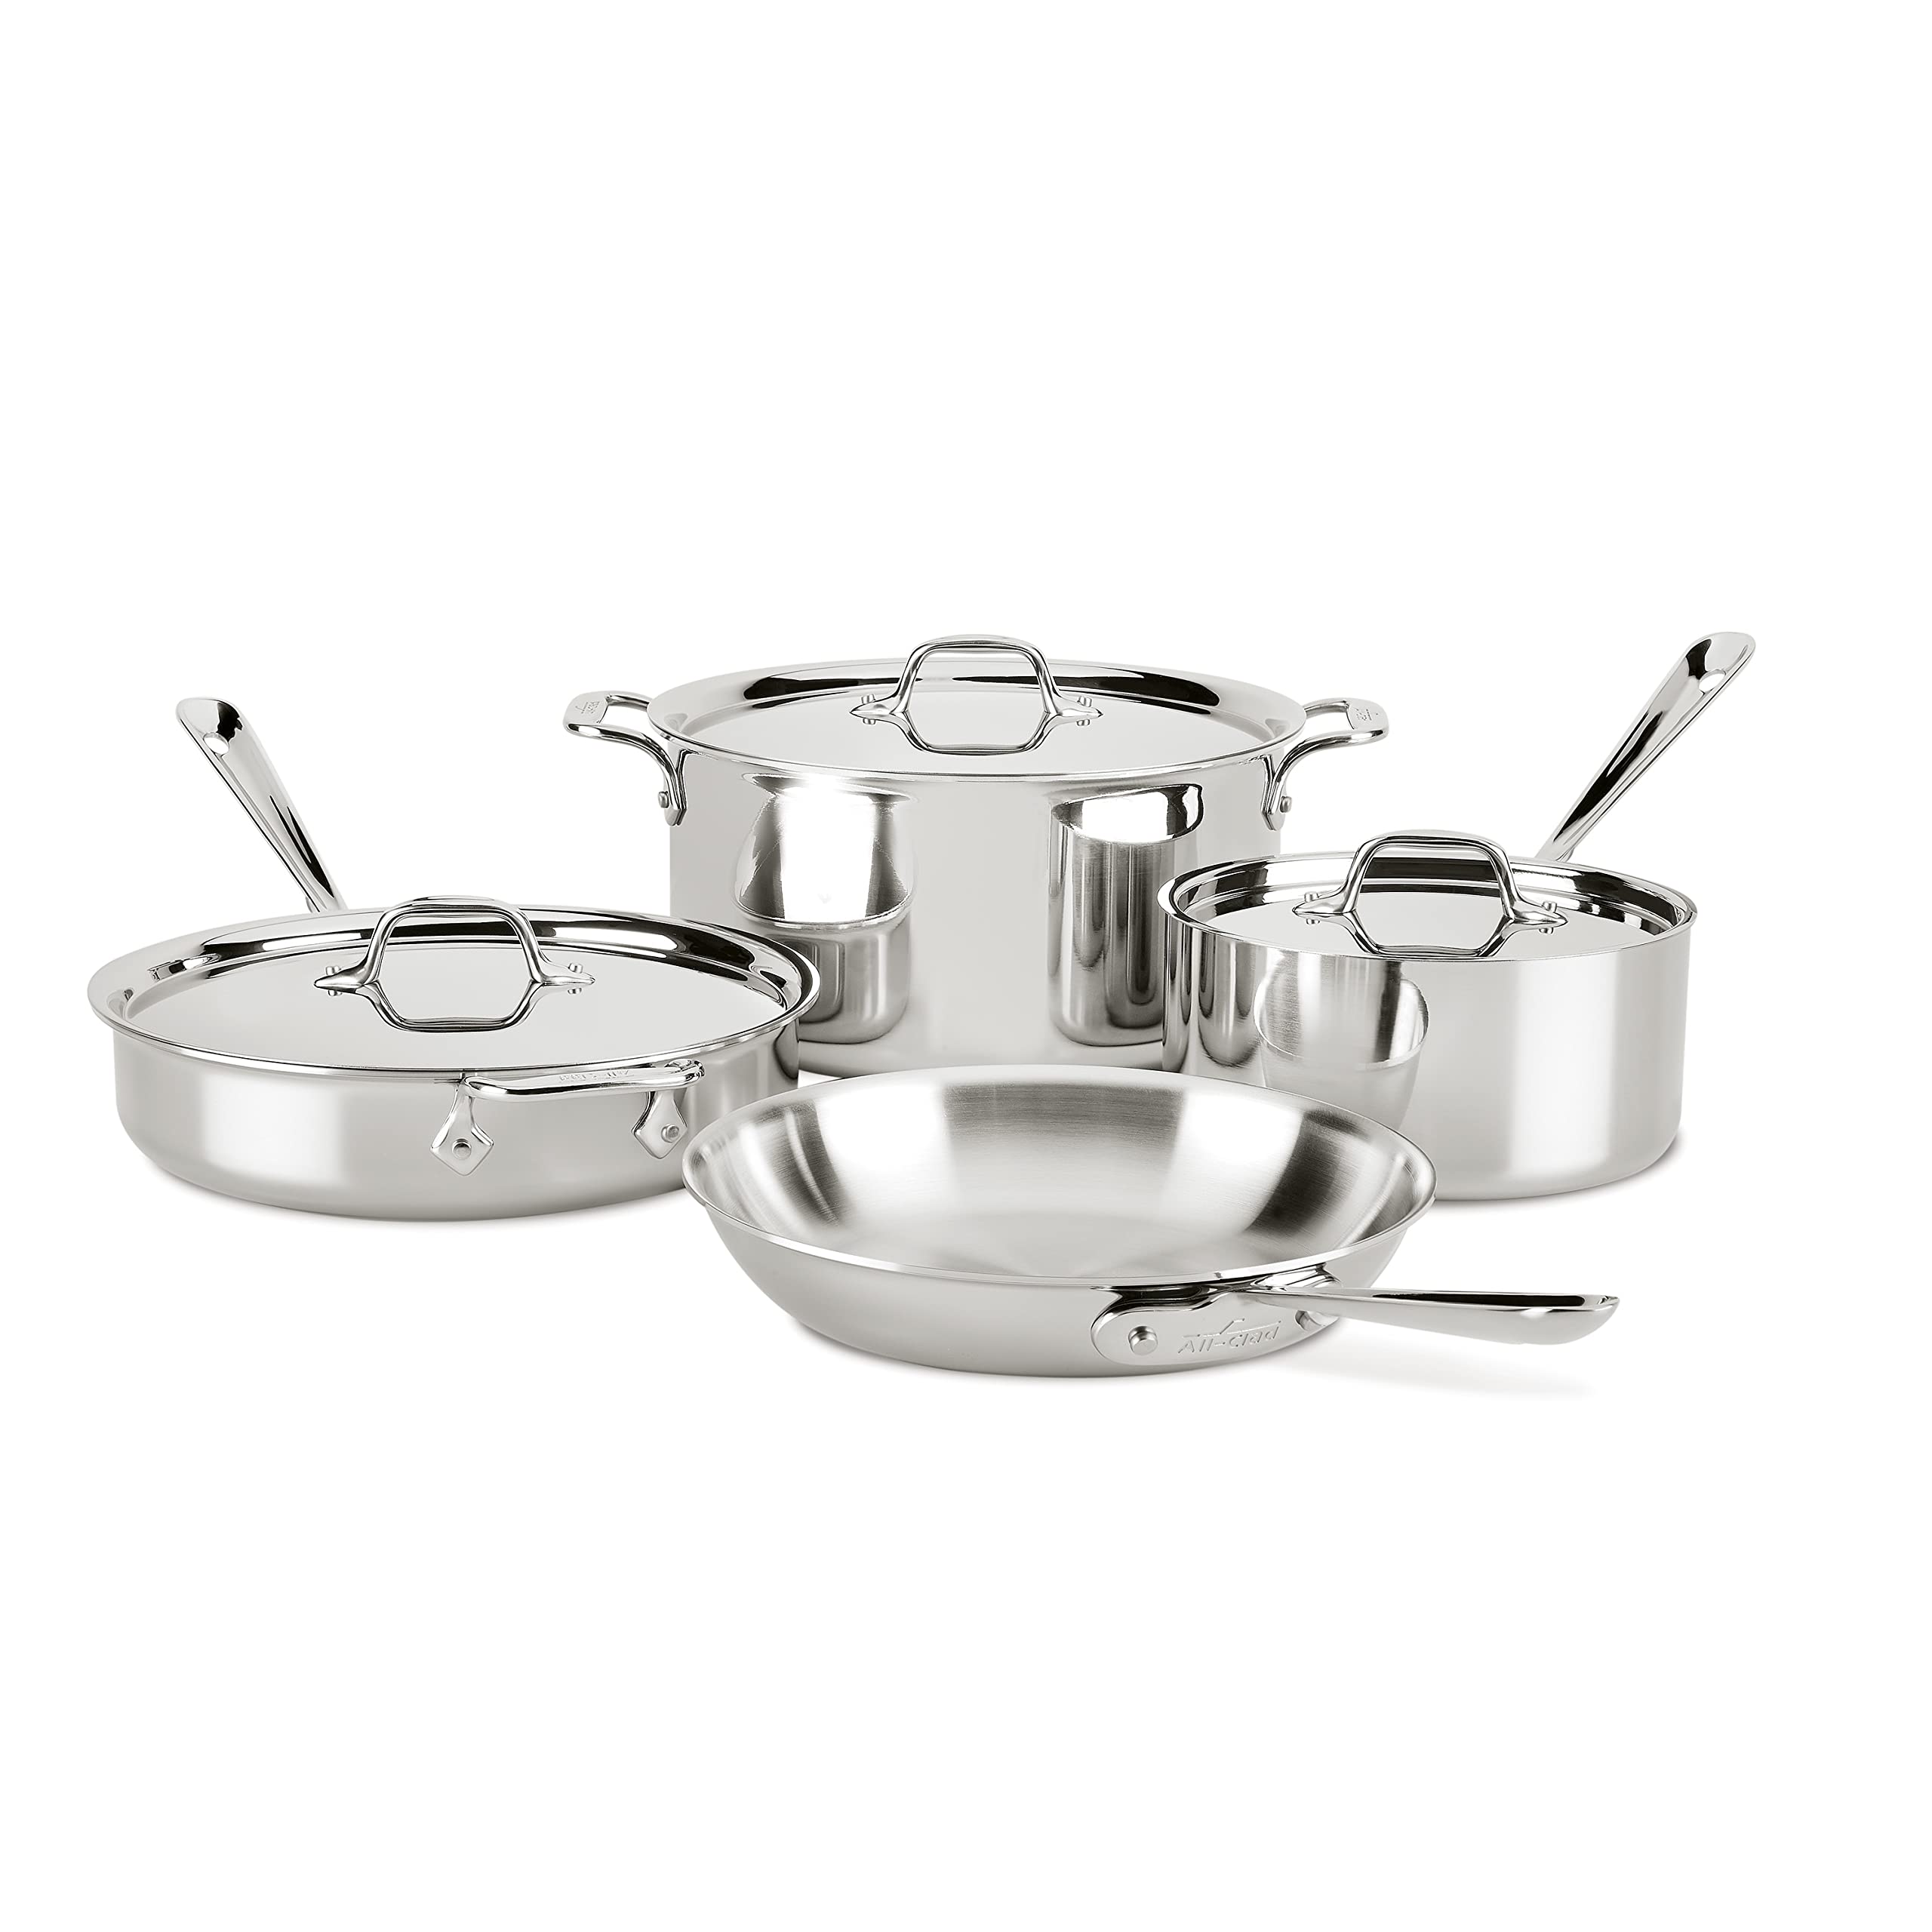 All-Clad D3 3-Ply Stainless Steel Cookware Set 7 Piece Induction Oven Broil Safe 600F Pots and Pans,Silver